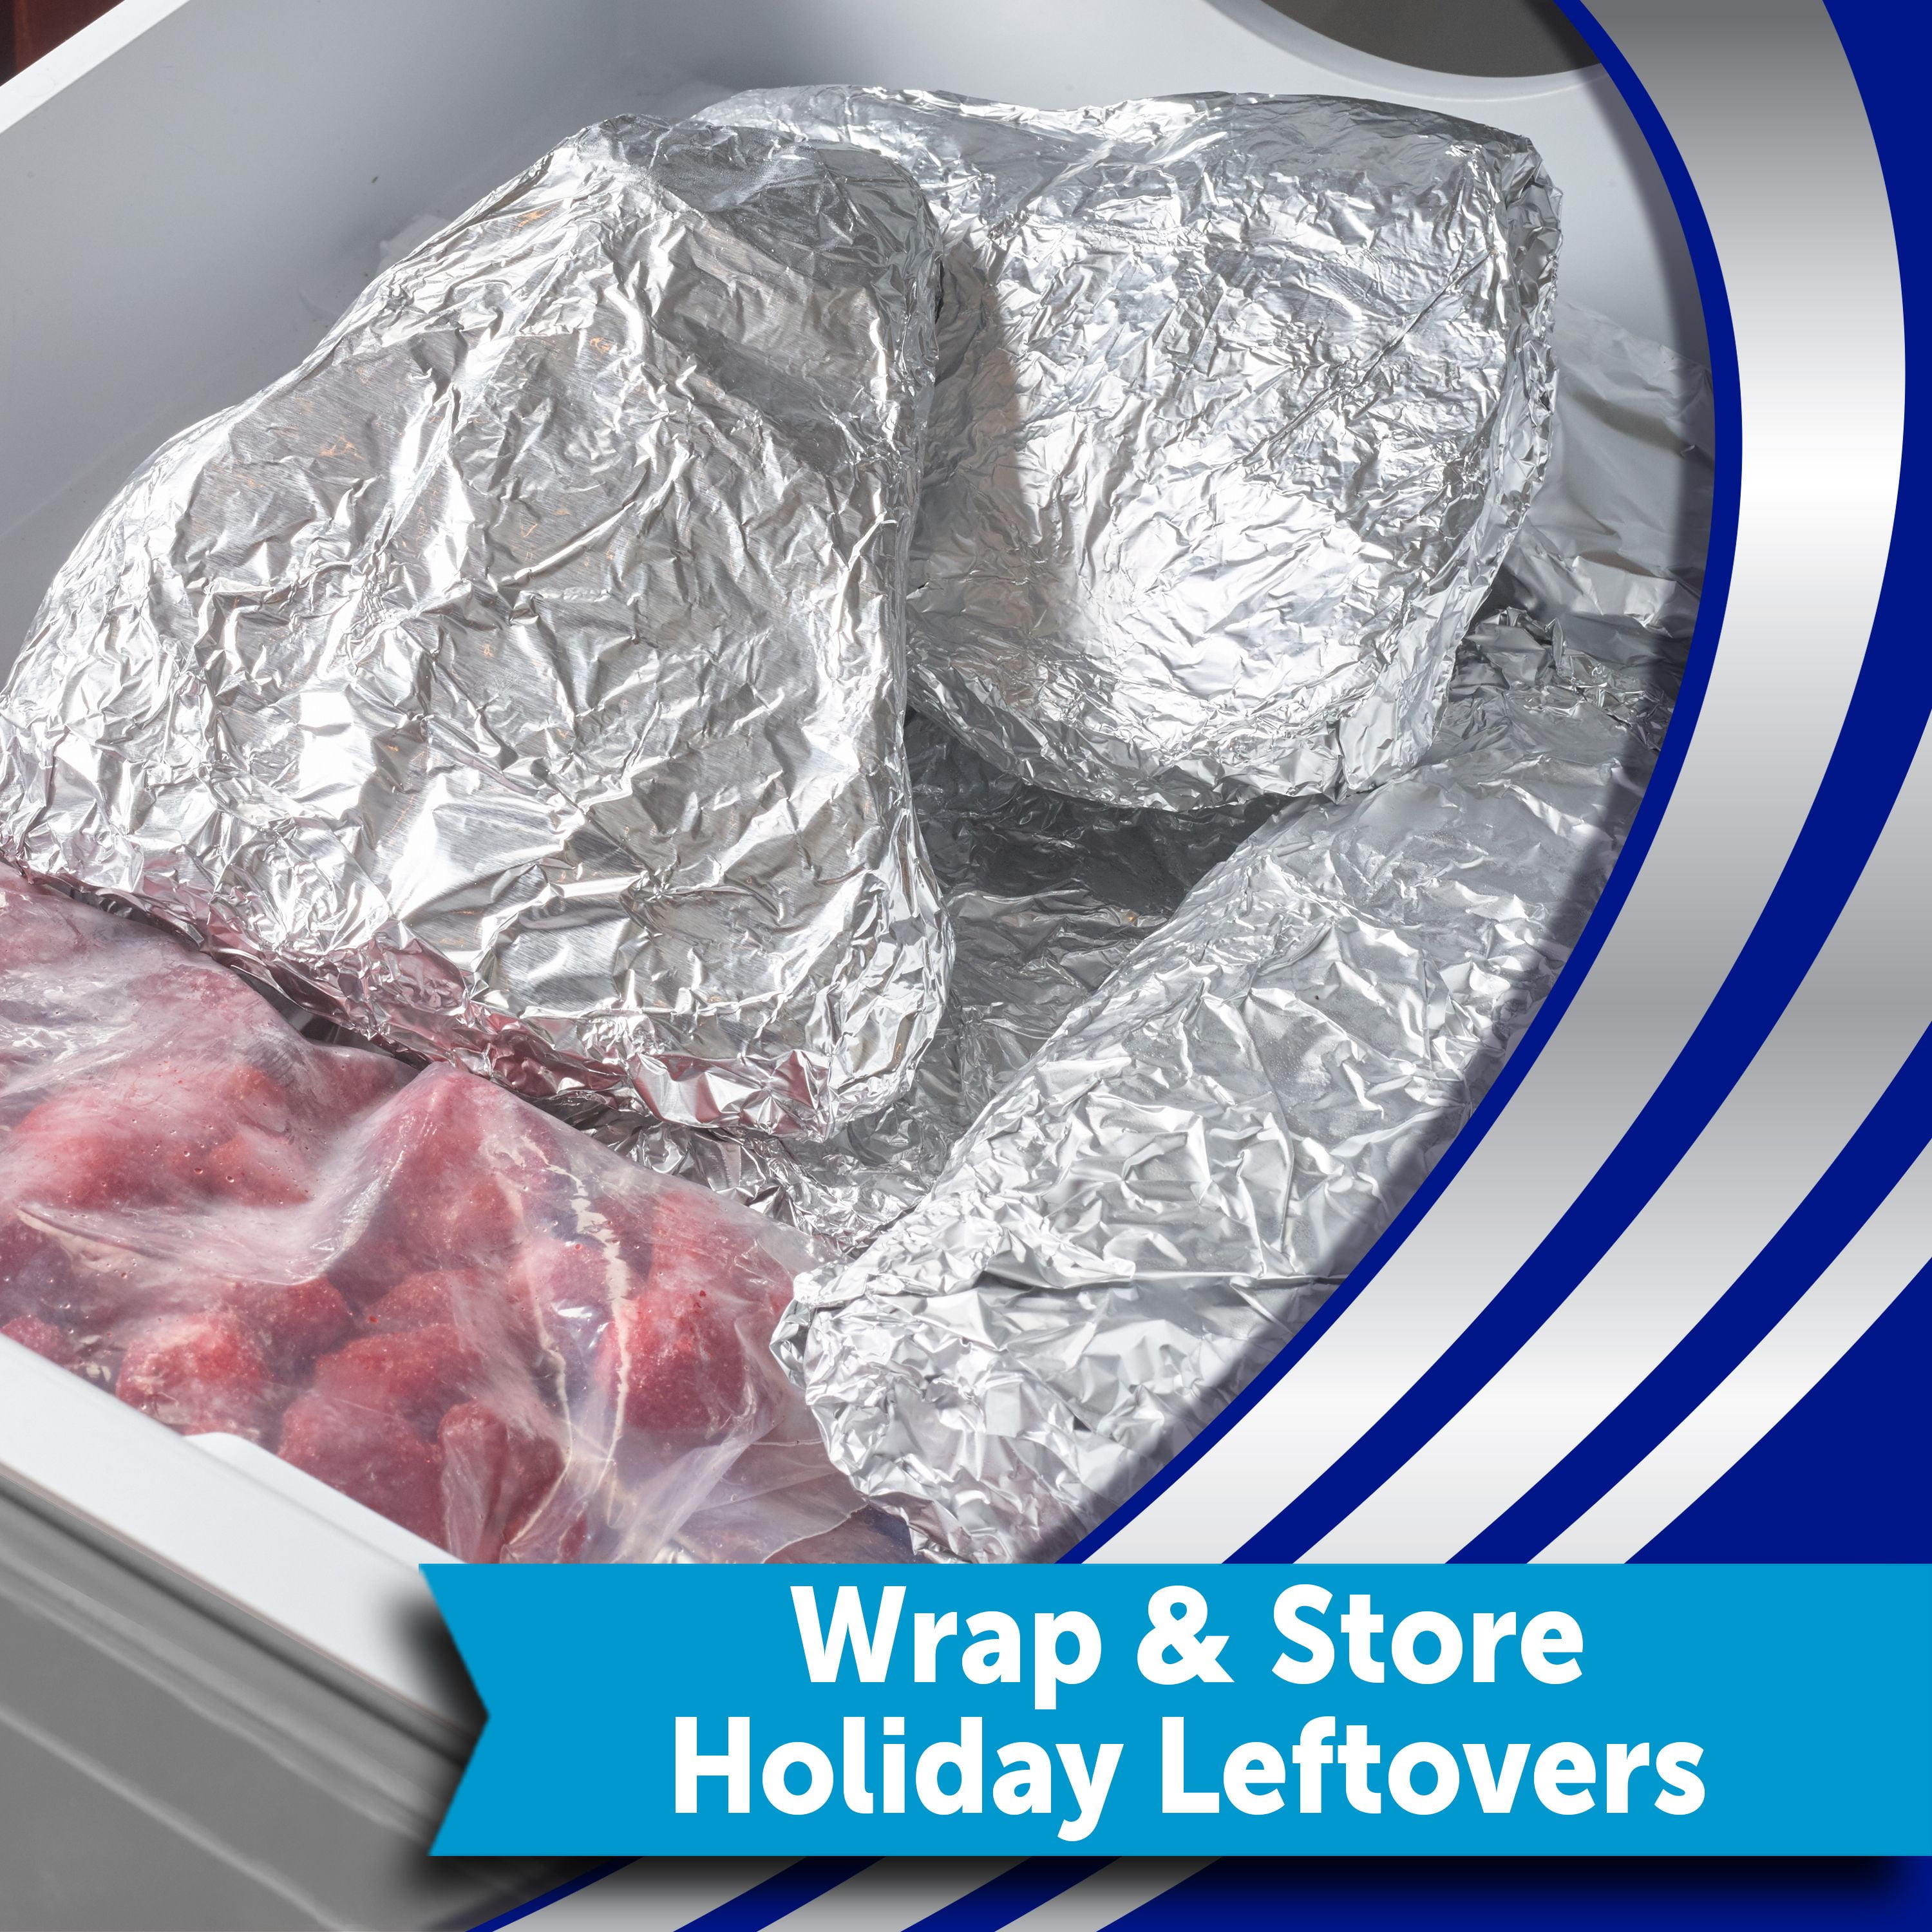 Reynolds Wrap Everyday Strength 500 Square Feet Aluminum Foil (2 ct)  Delivery - DoorDash